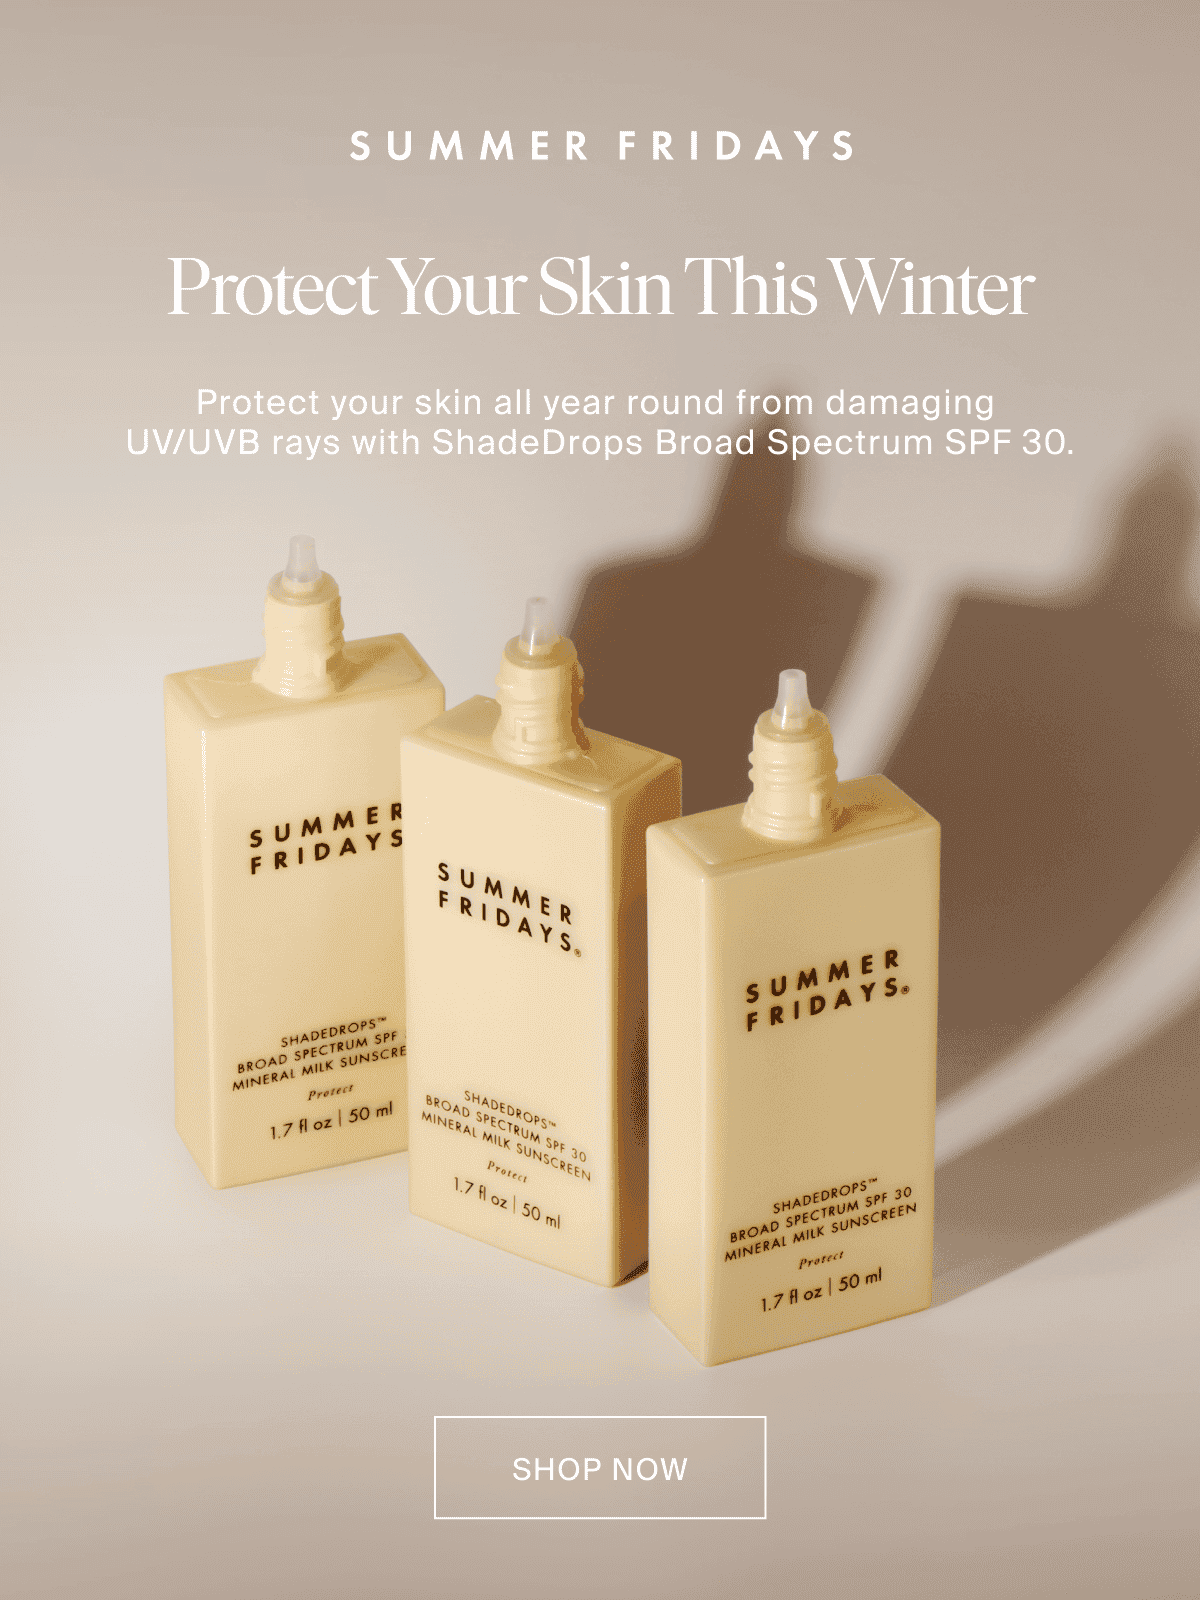 Protect Your Skin This Winter